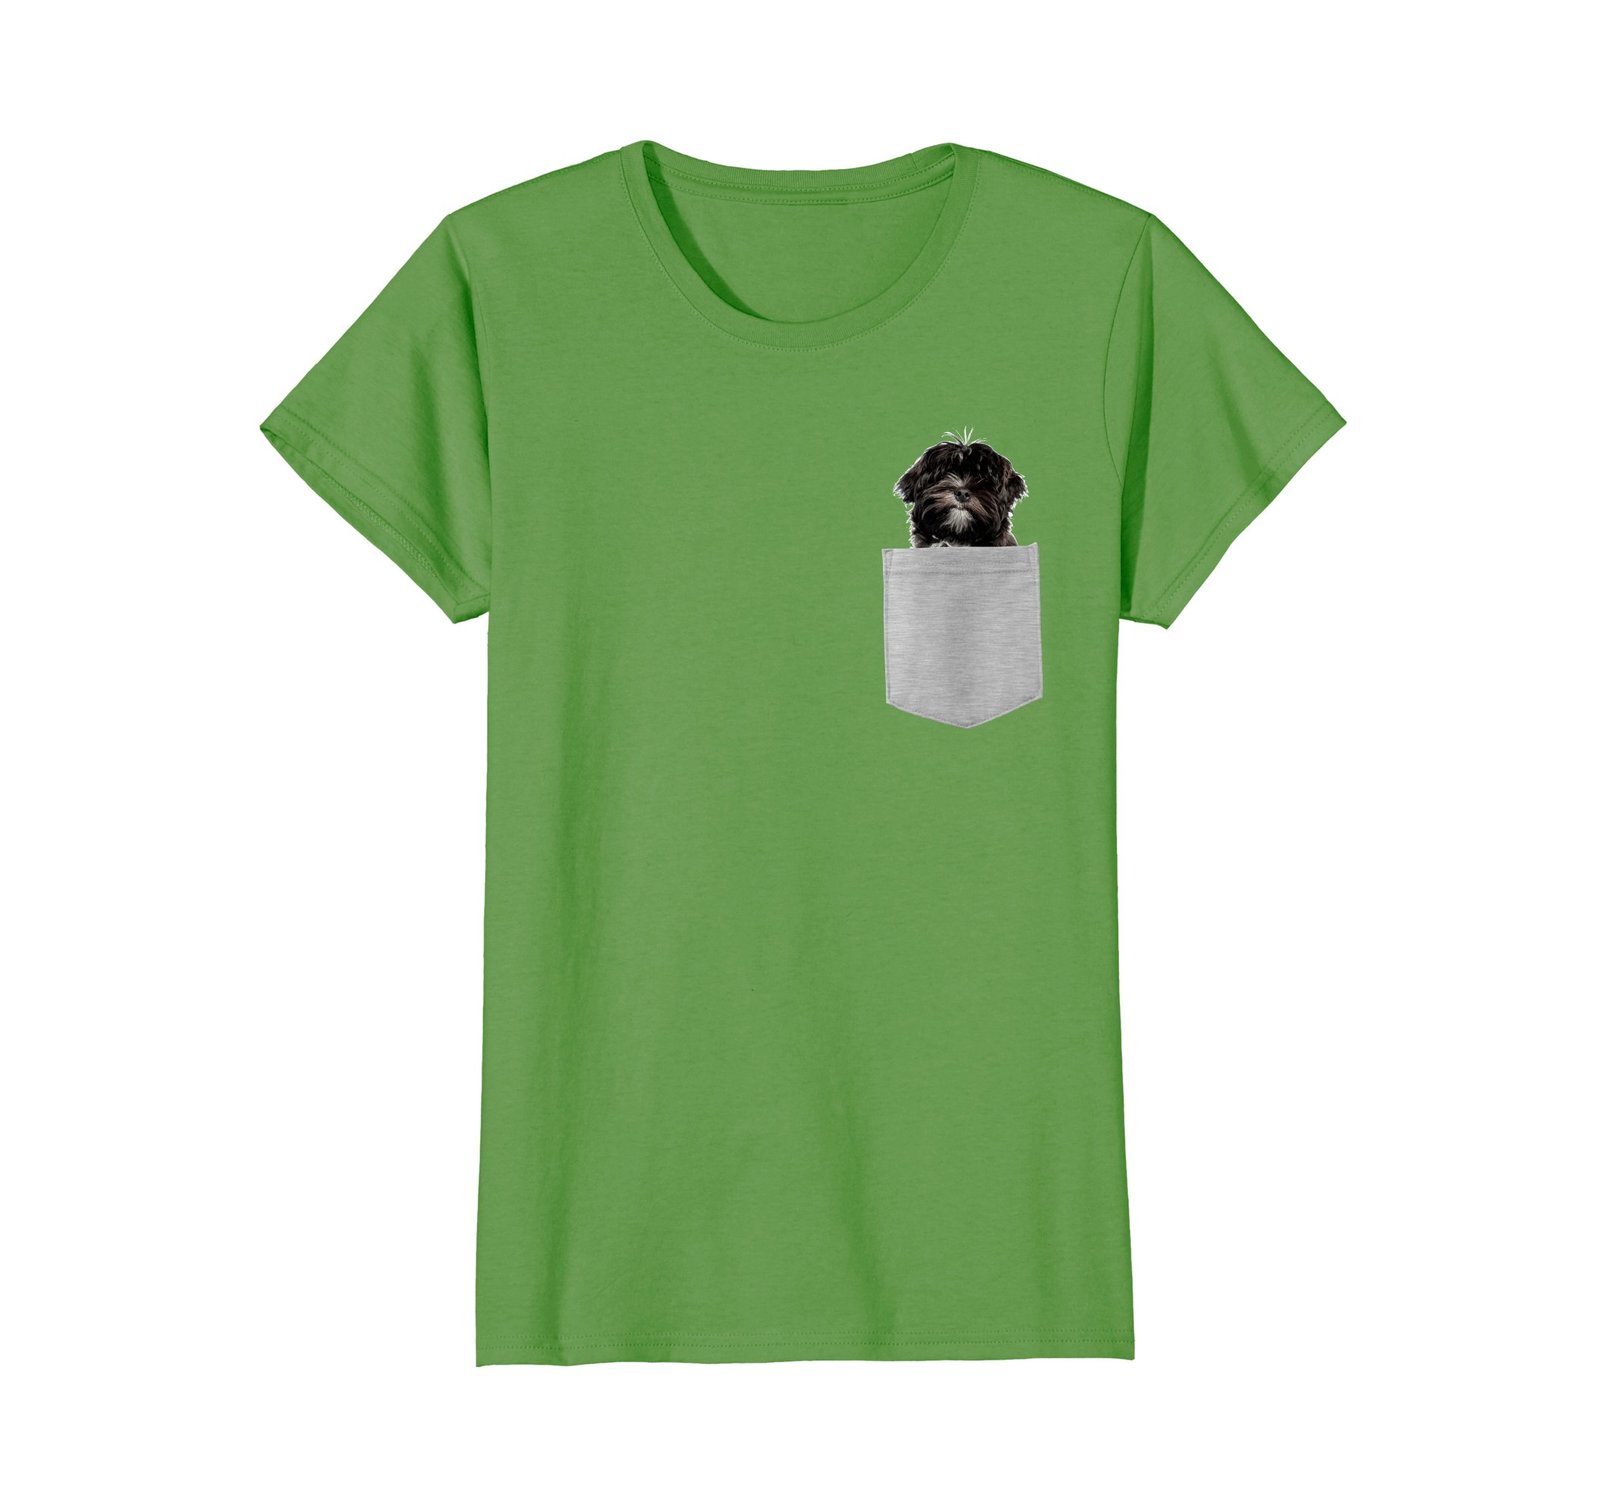 Dog in Your Pocket Lhasa Apso T-shirt - $19.99 - $20.99